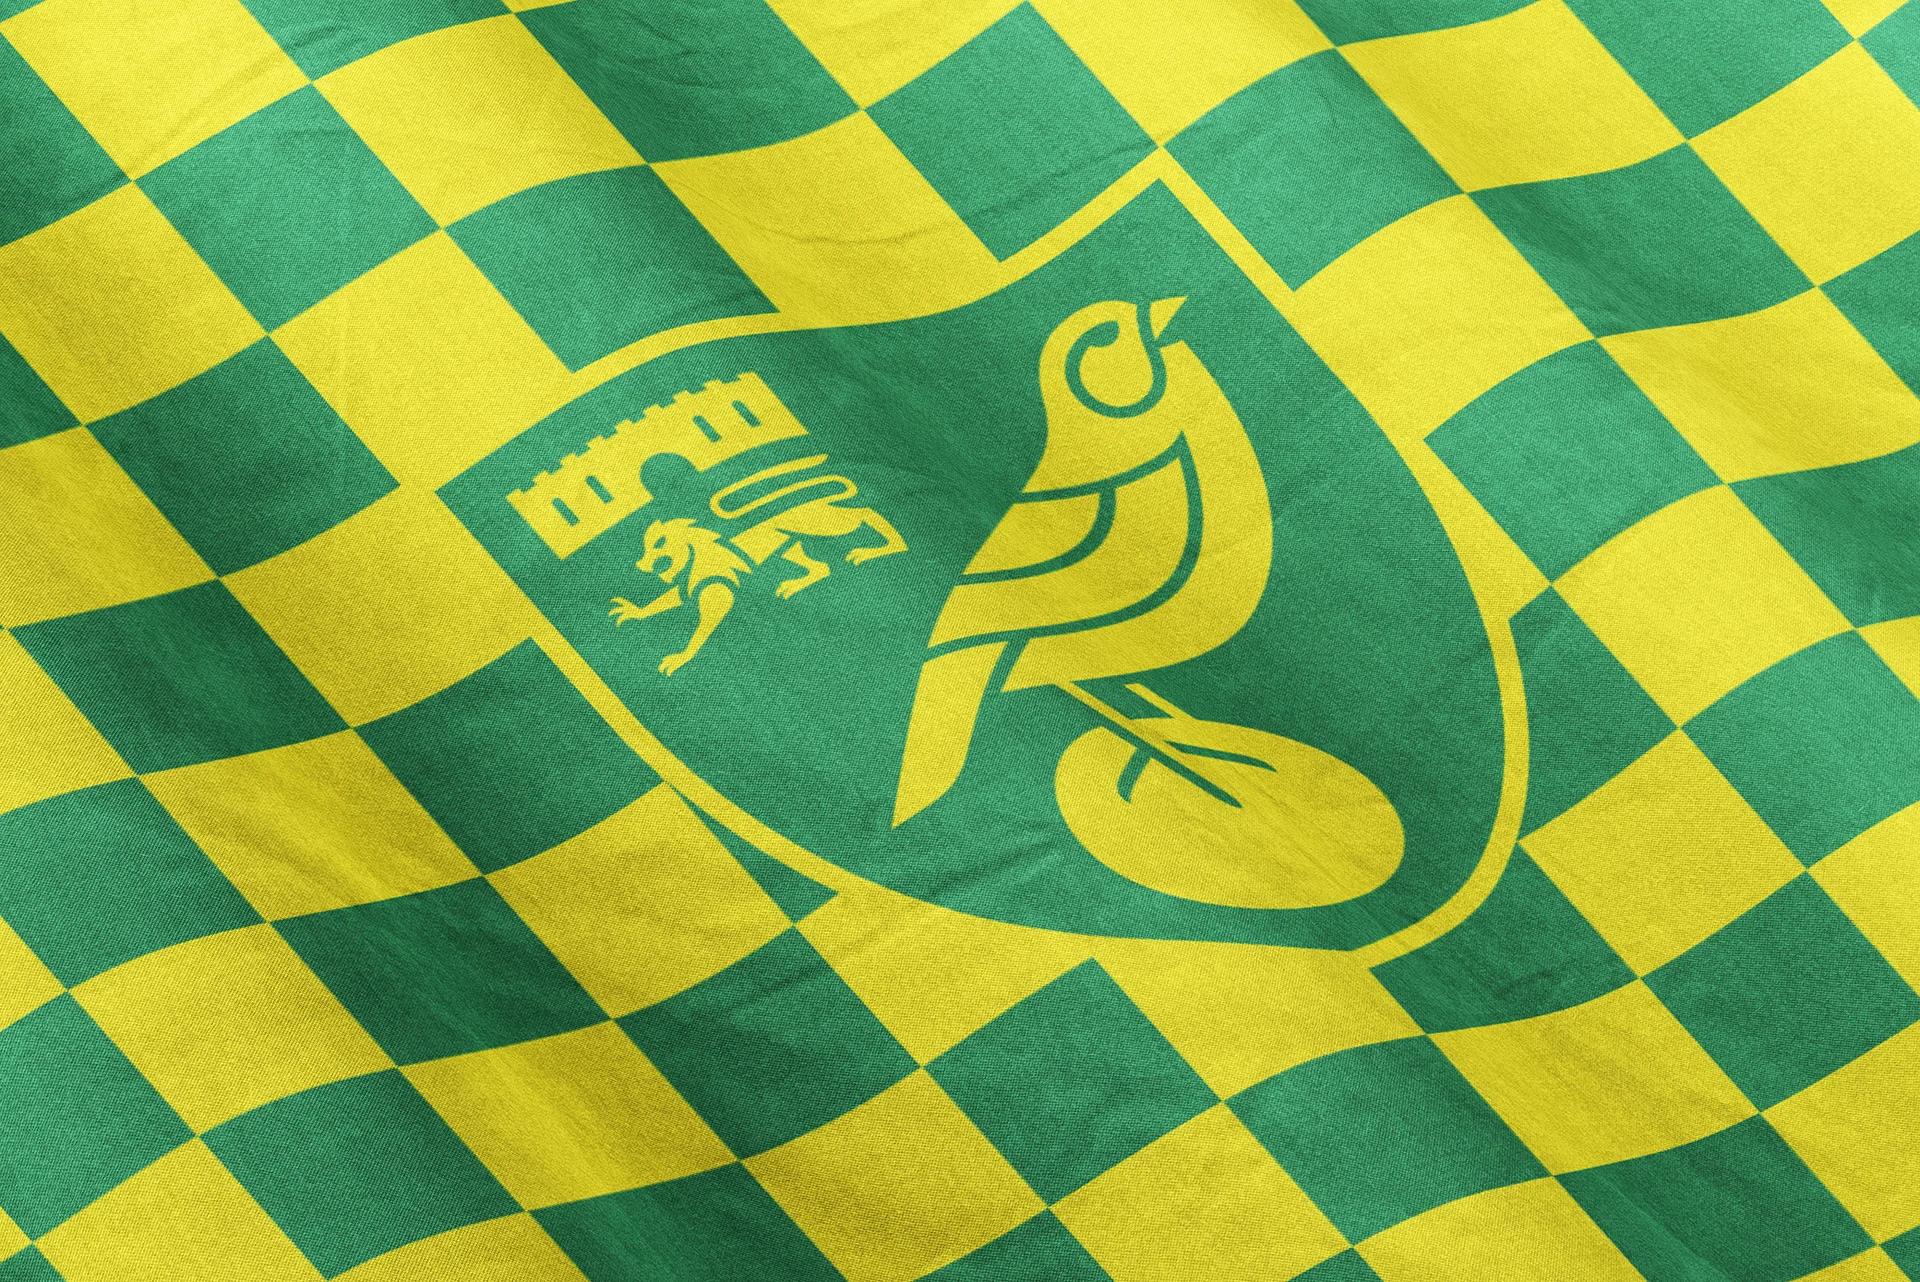 The new Norwich City FC crest